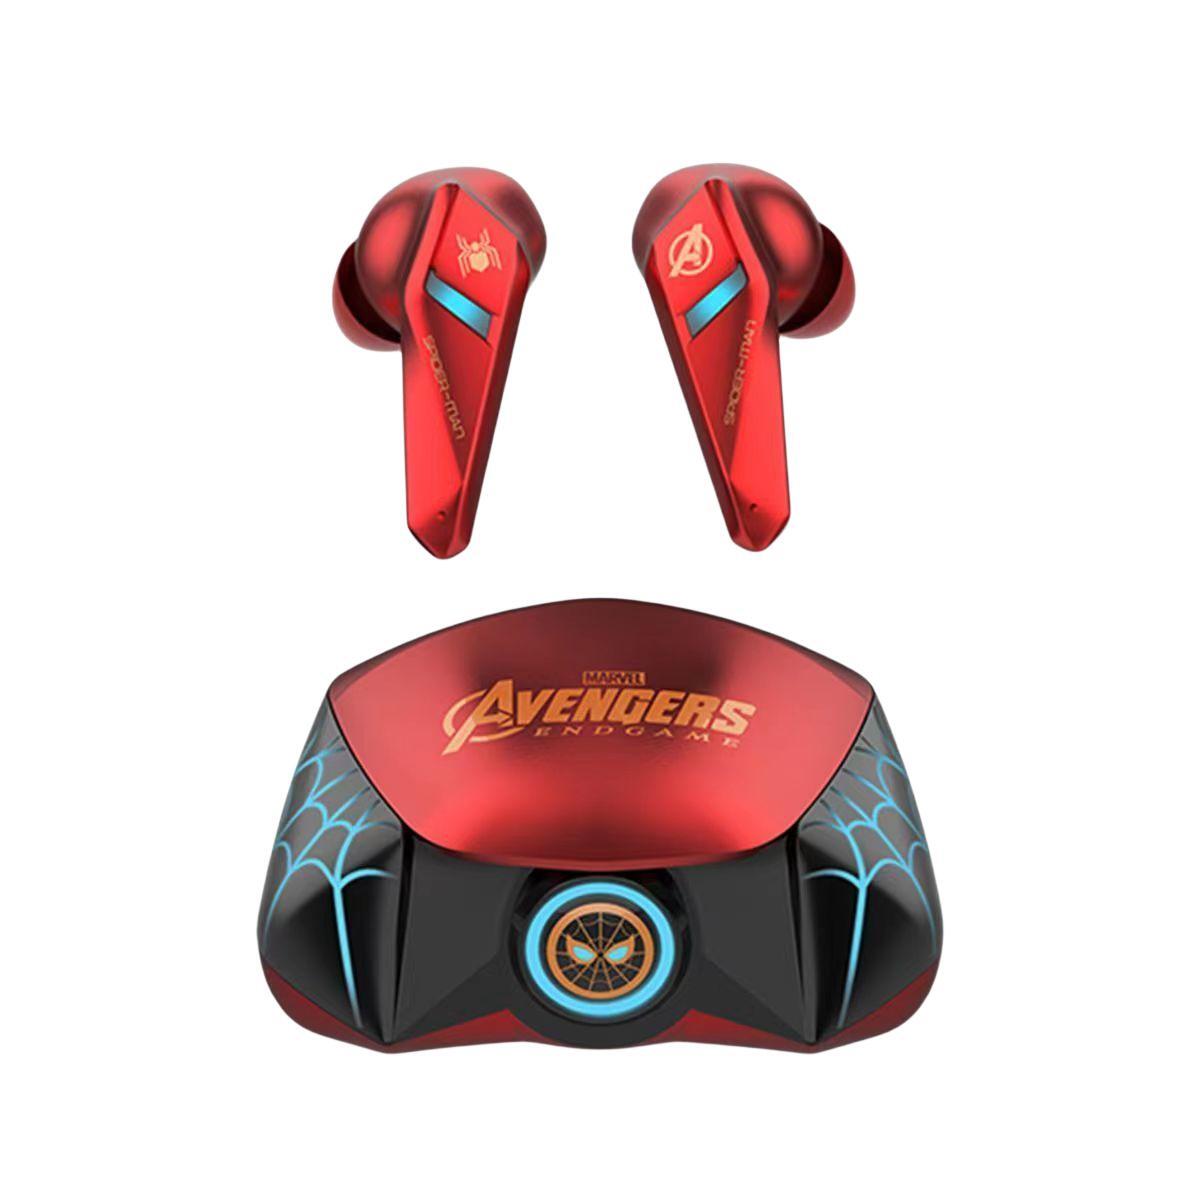 SUPERHERO STYLE BLUETOOTH HEADSET, LONG LIFE, CLEAR SOUND QUALITY, COMPACT AND CONVENIENT TREND BLUETOOTH HEADSET.